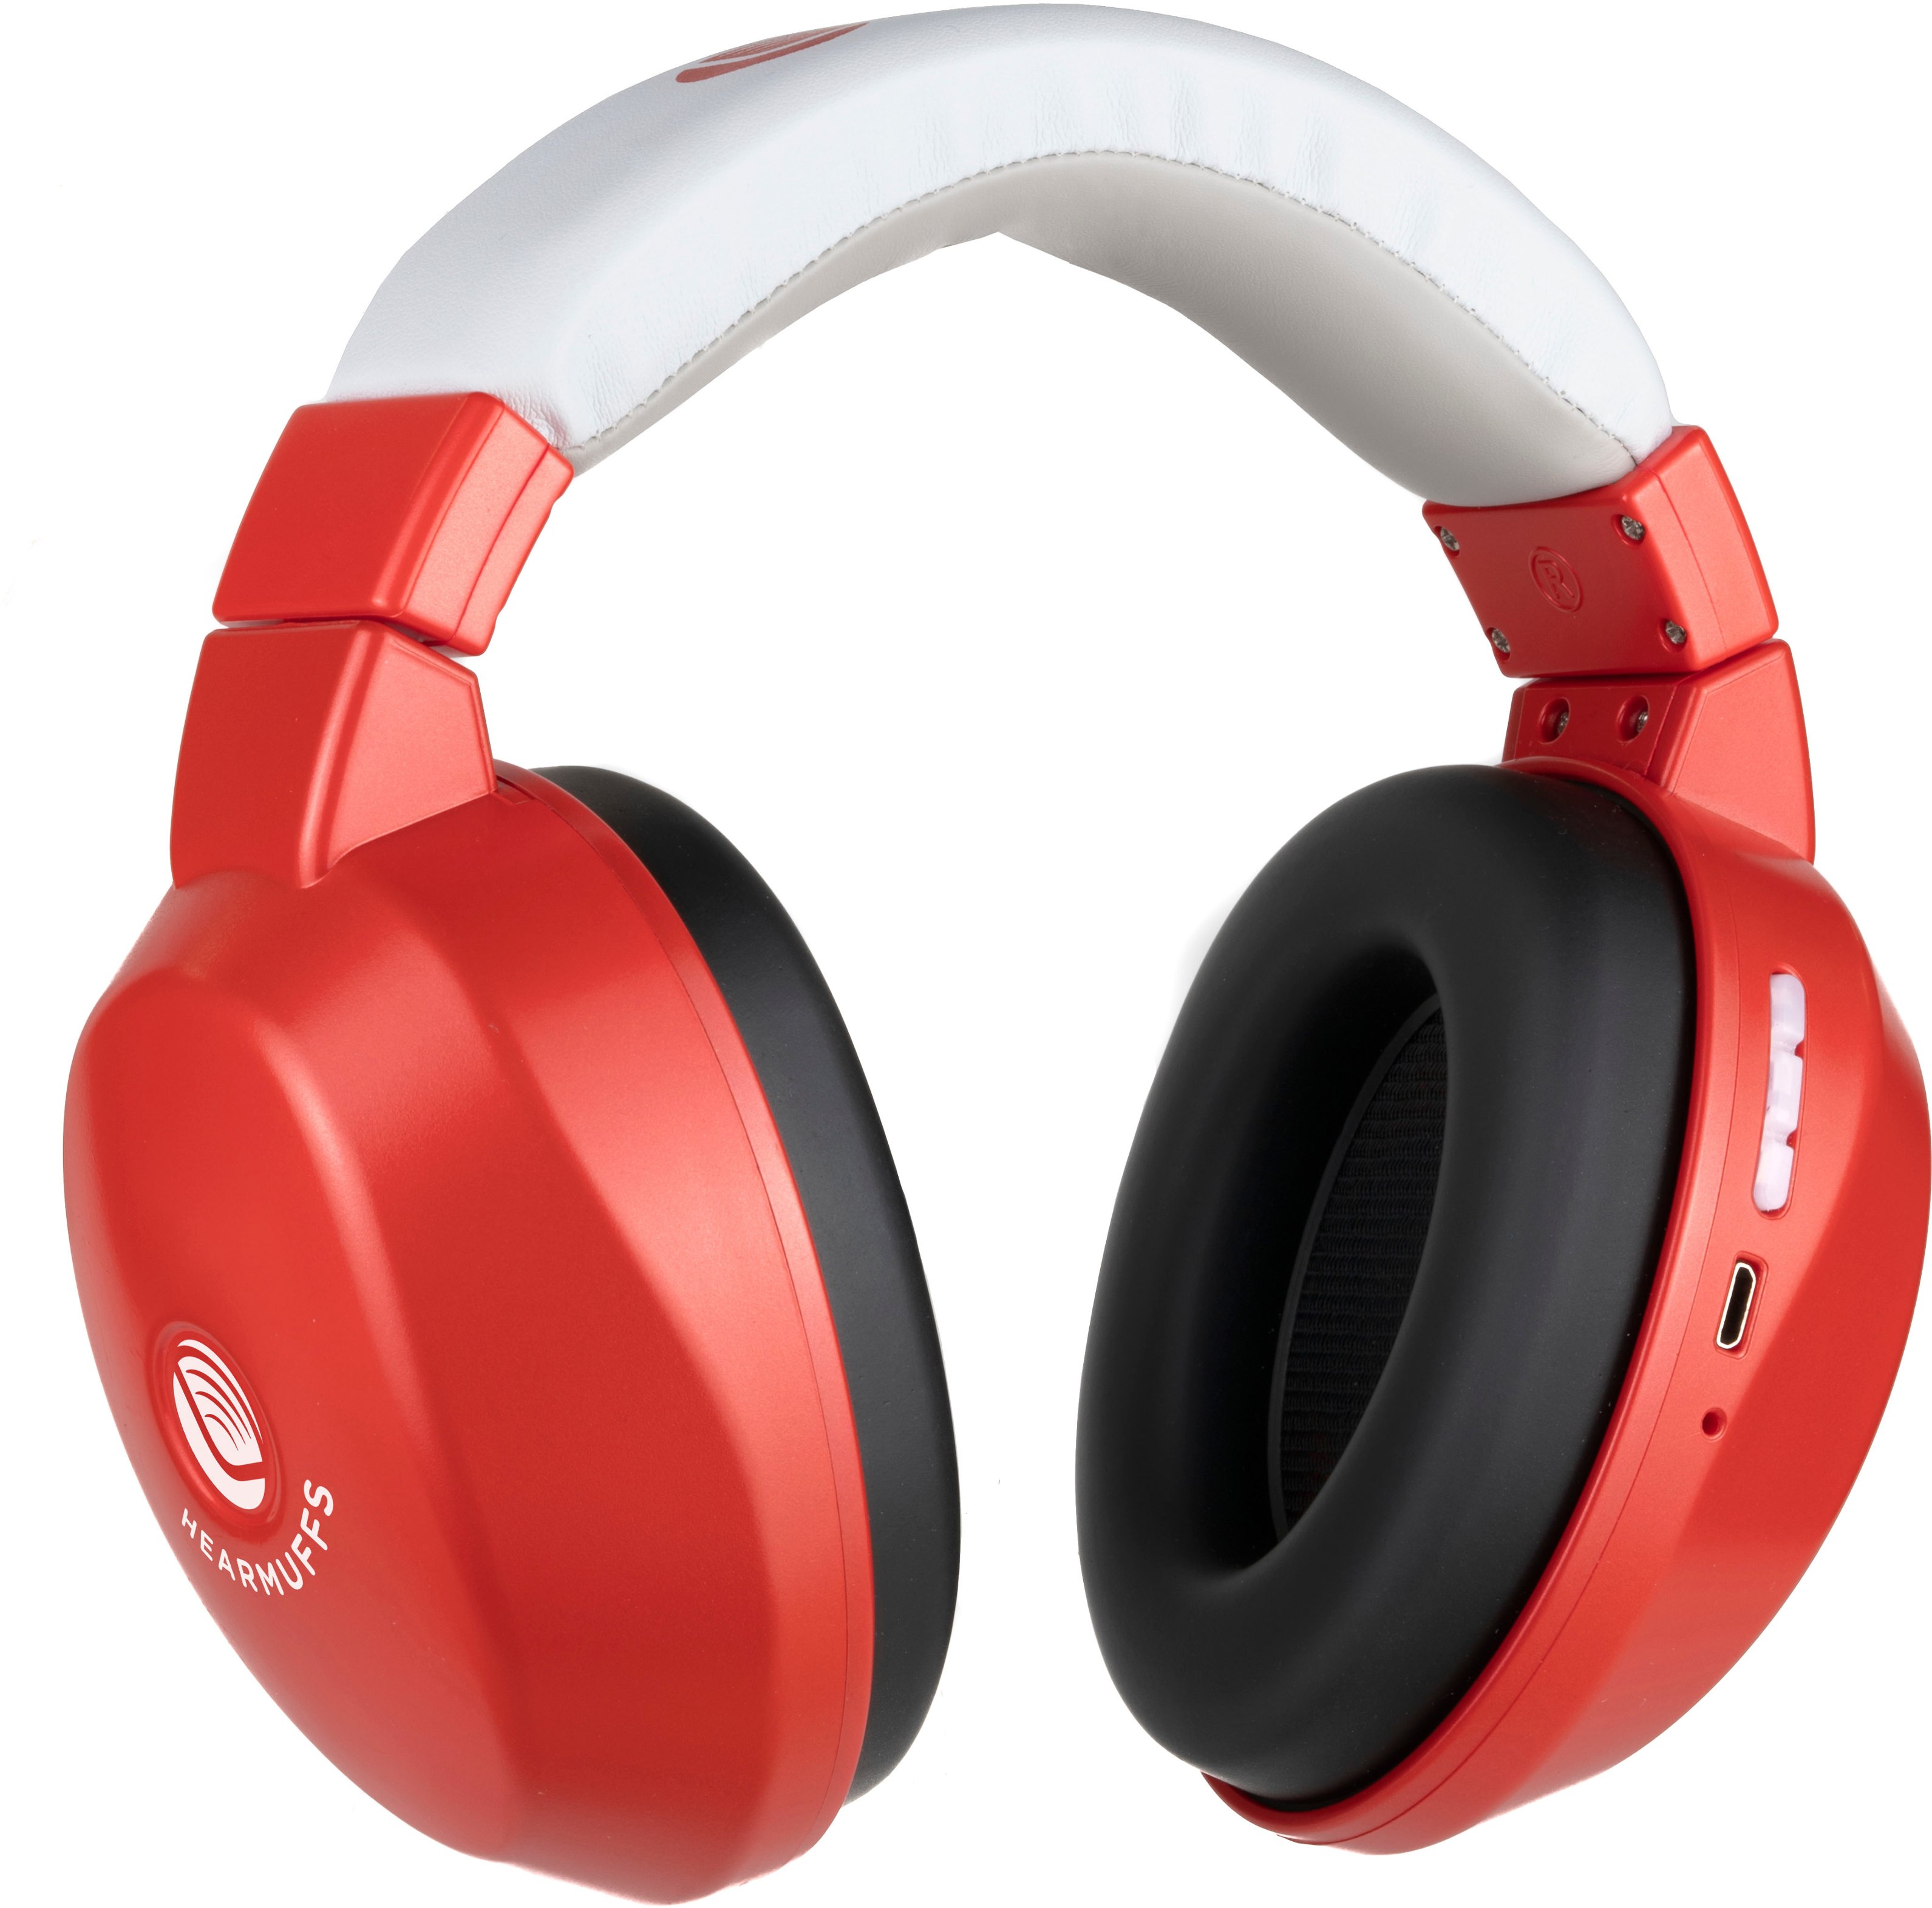 Angle View: Lucid Hearing - Bluetooth HearMuffs for Children - Hearing Protection Ear Muffs Ideal for Kids 5-10 Years Old - RED